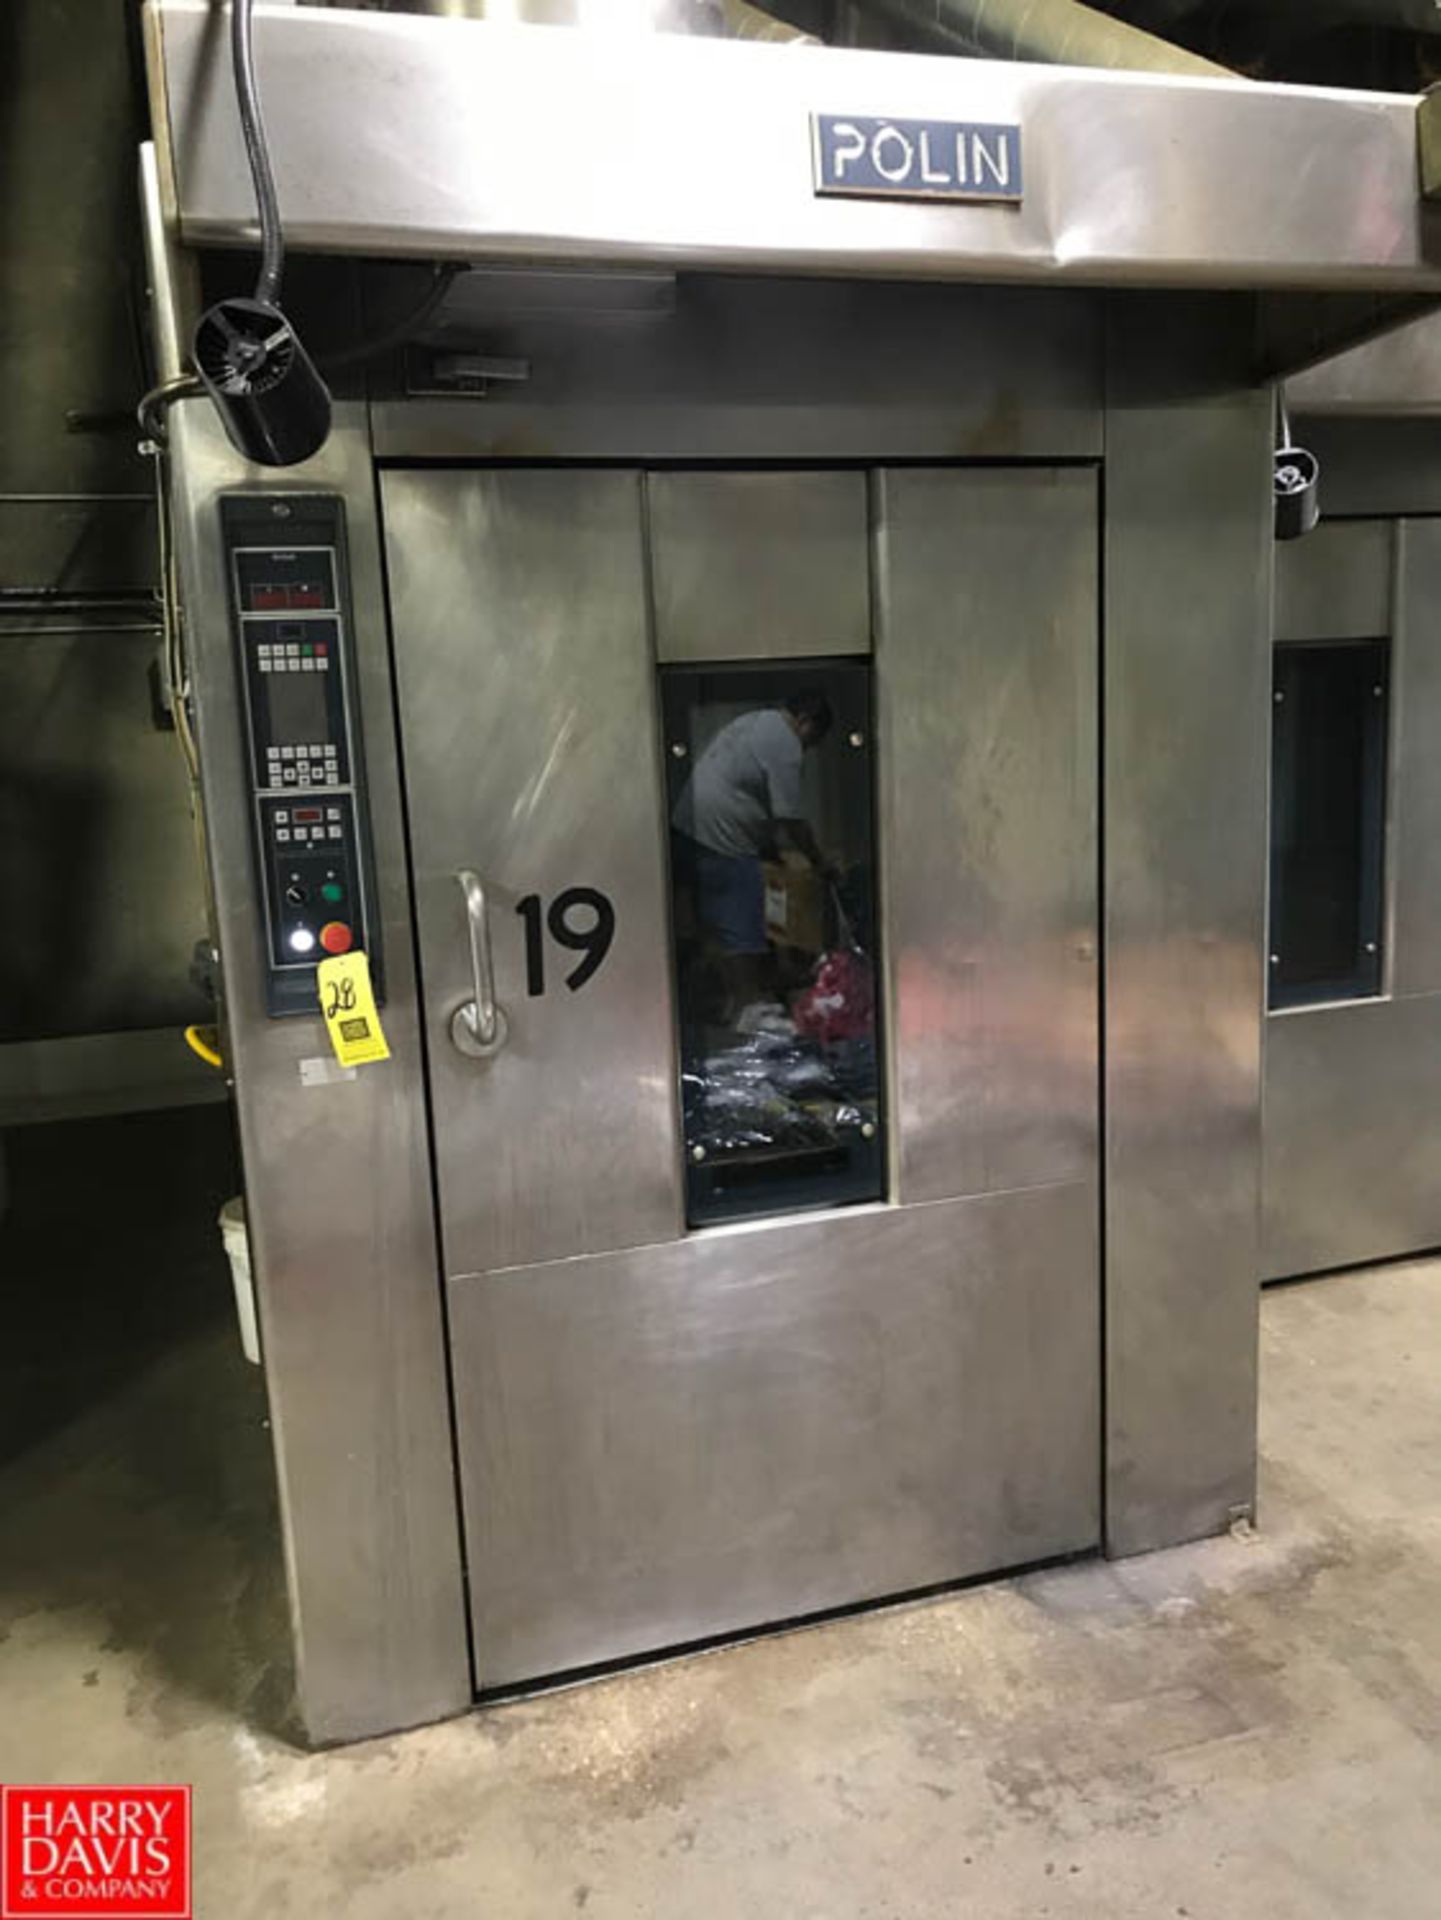 2011 Polin ROTO AVANT Double Rack Rotating Gas-Fired Oven, Model: ROTO 8095'200 SC, S/N: 1111106/